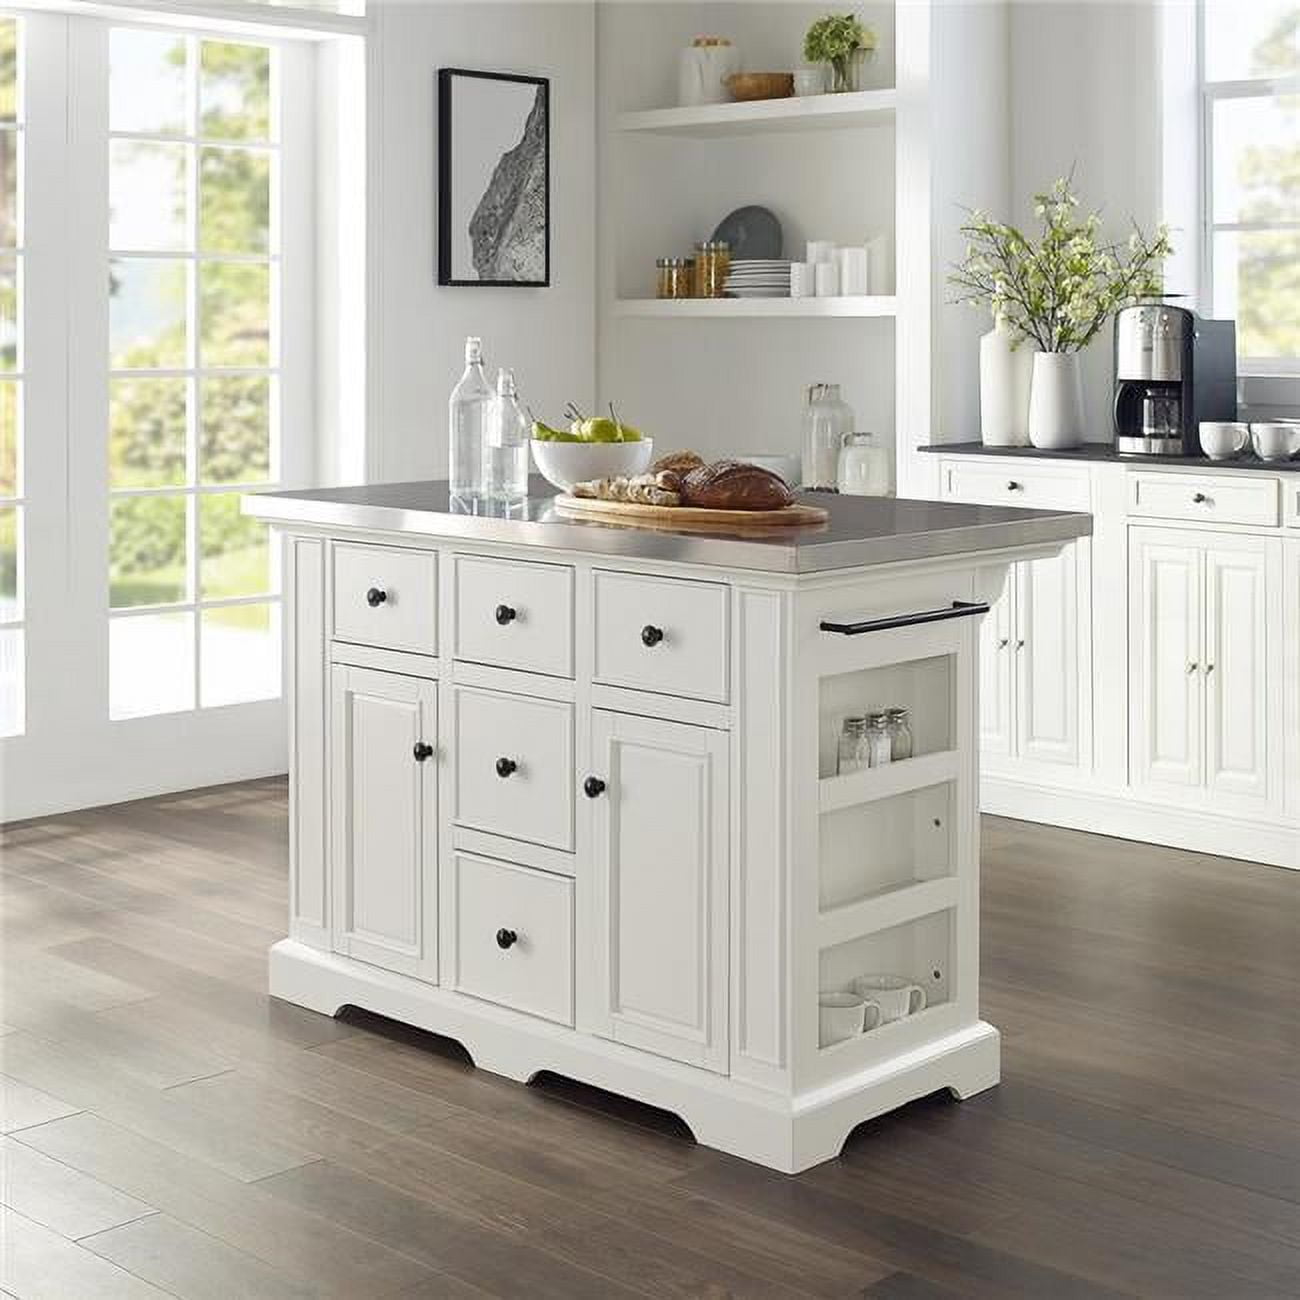 Crosley Furniture Cambridge Stainless Steel Top Portable Kitchen Island in  White